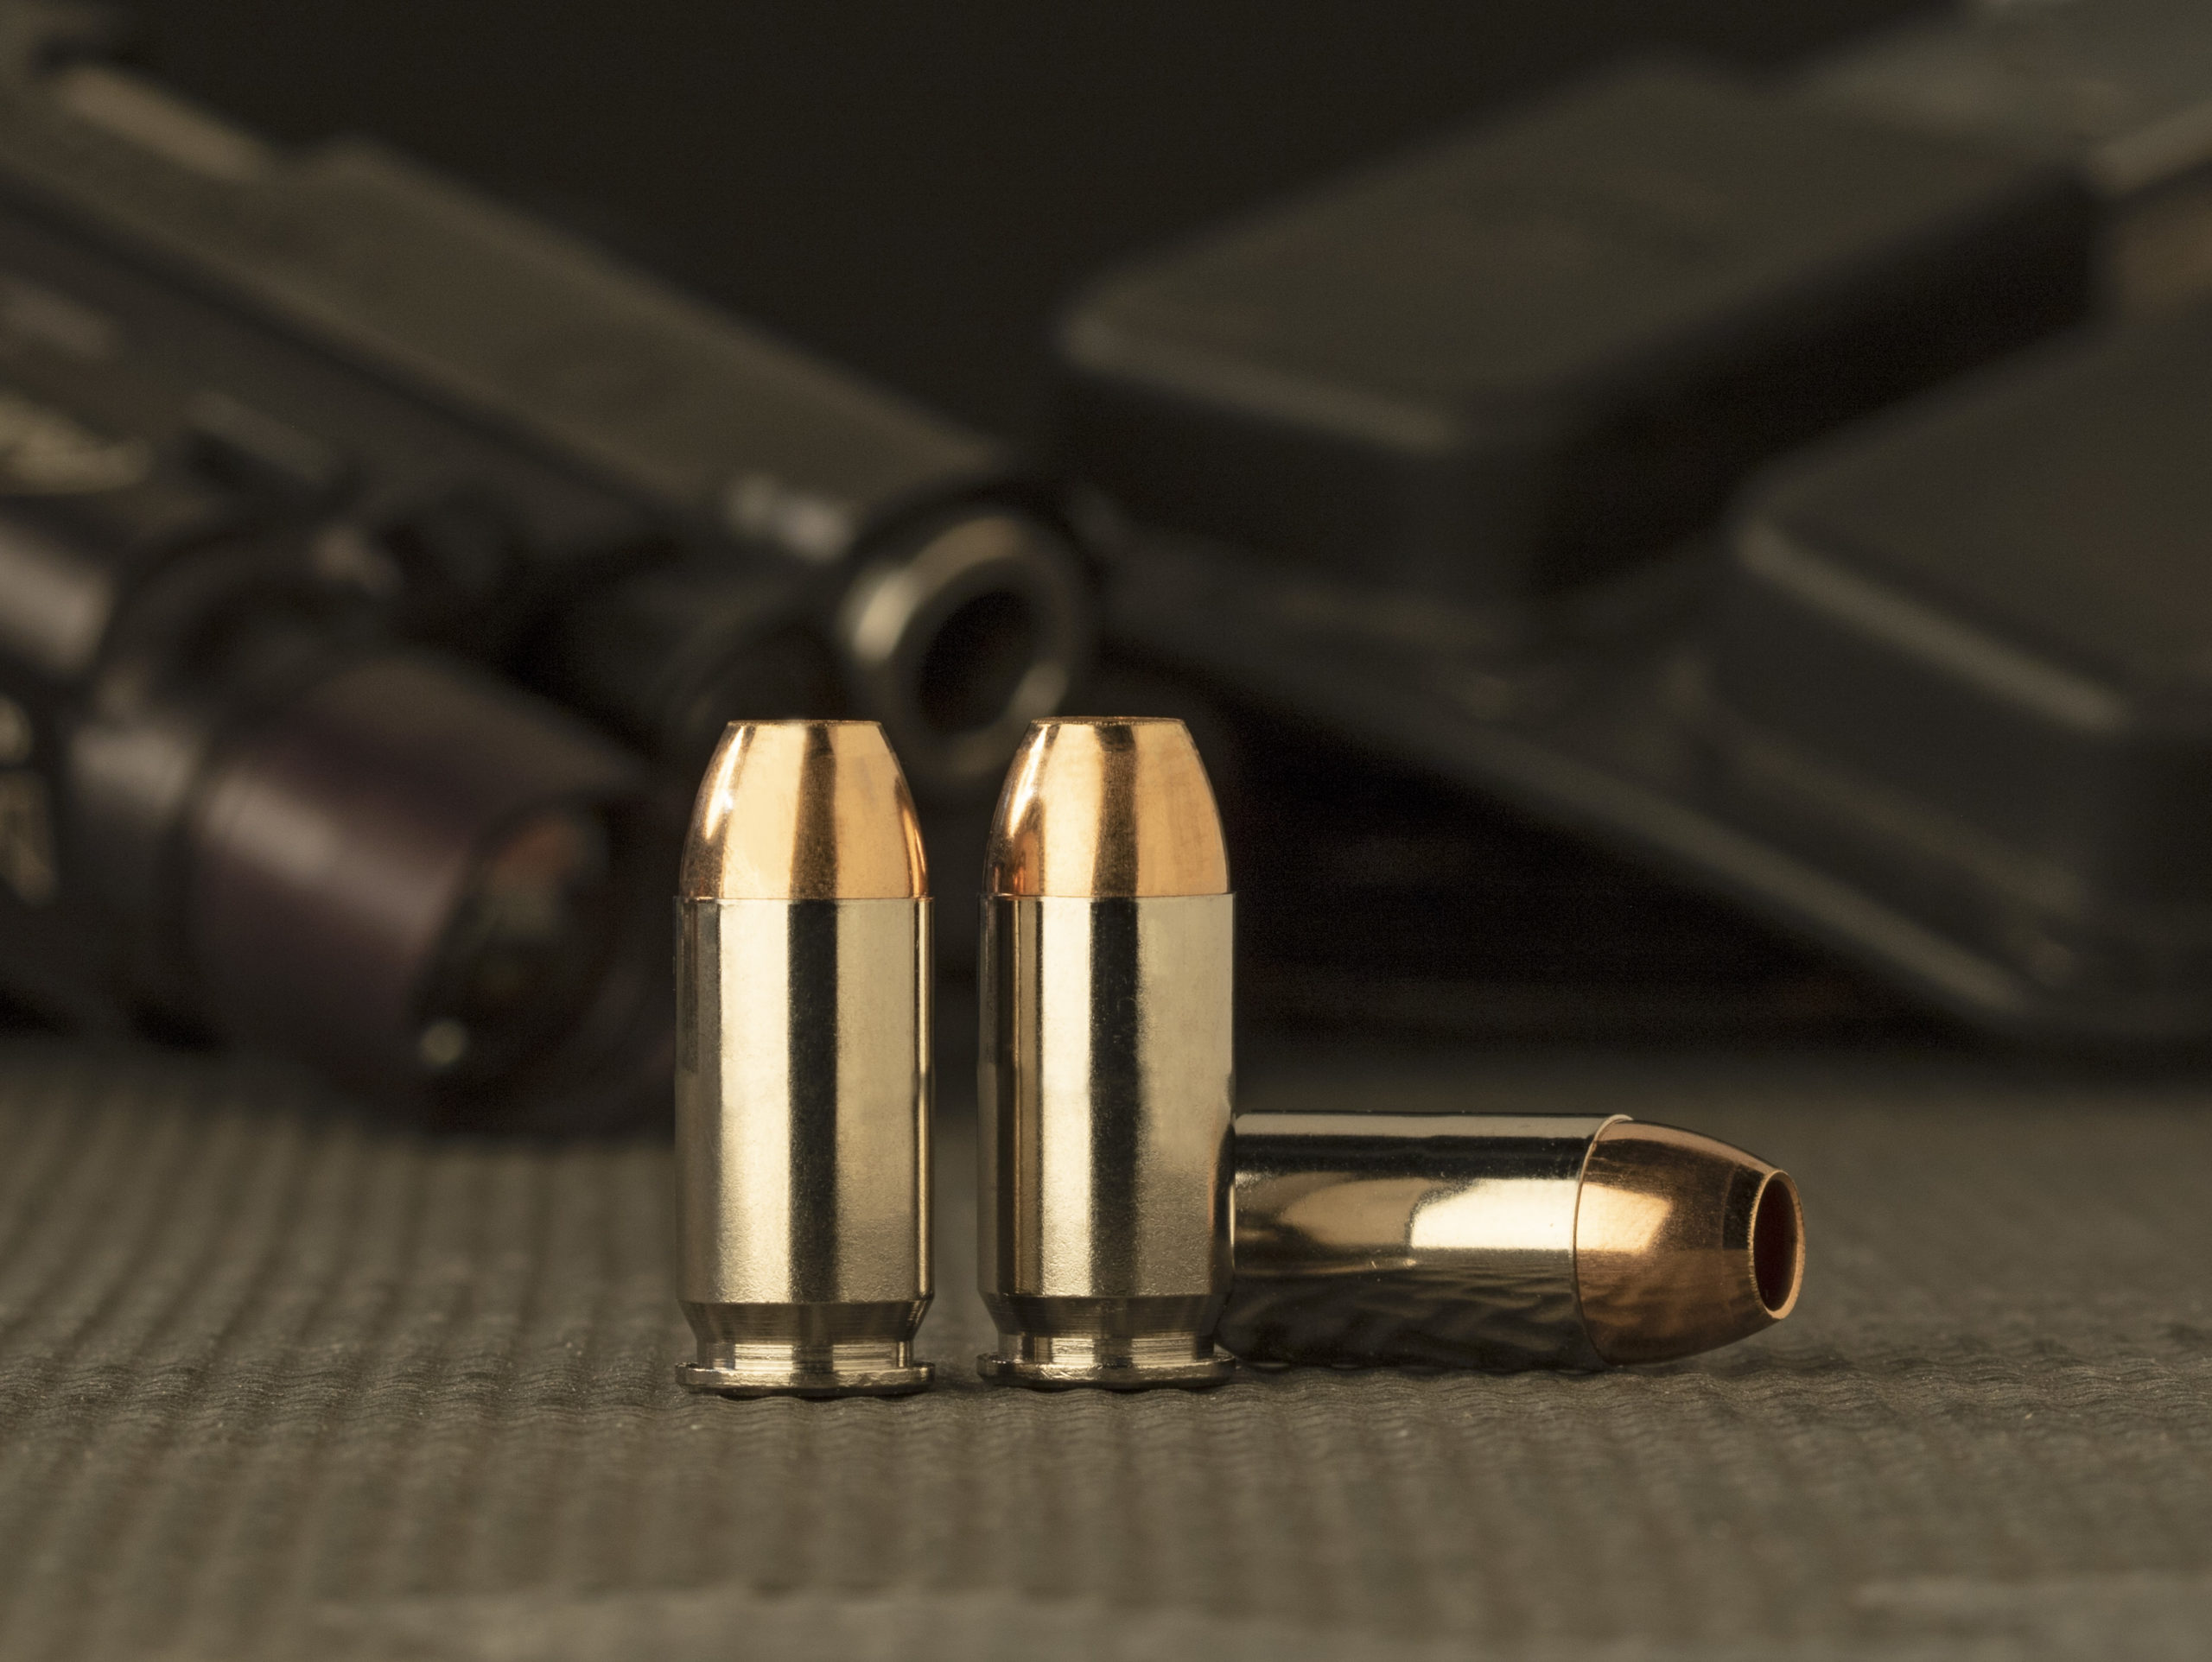 45 ACP DefenseCore™ Added to Suite of SIM-X® Product Offerings